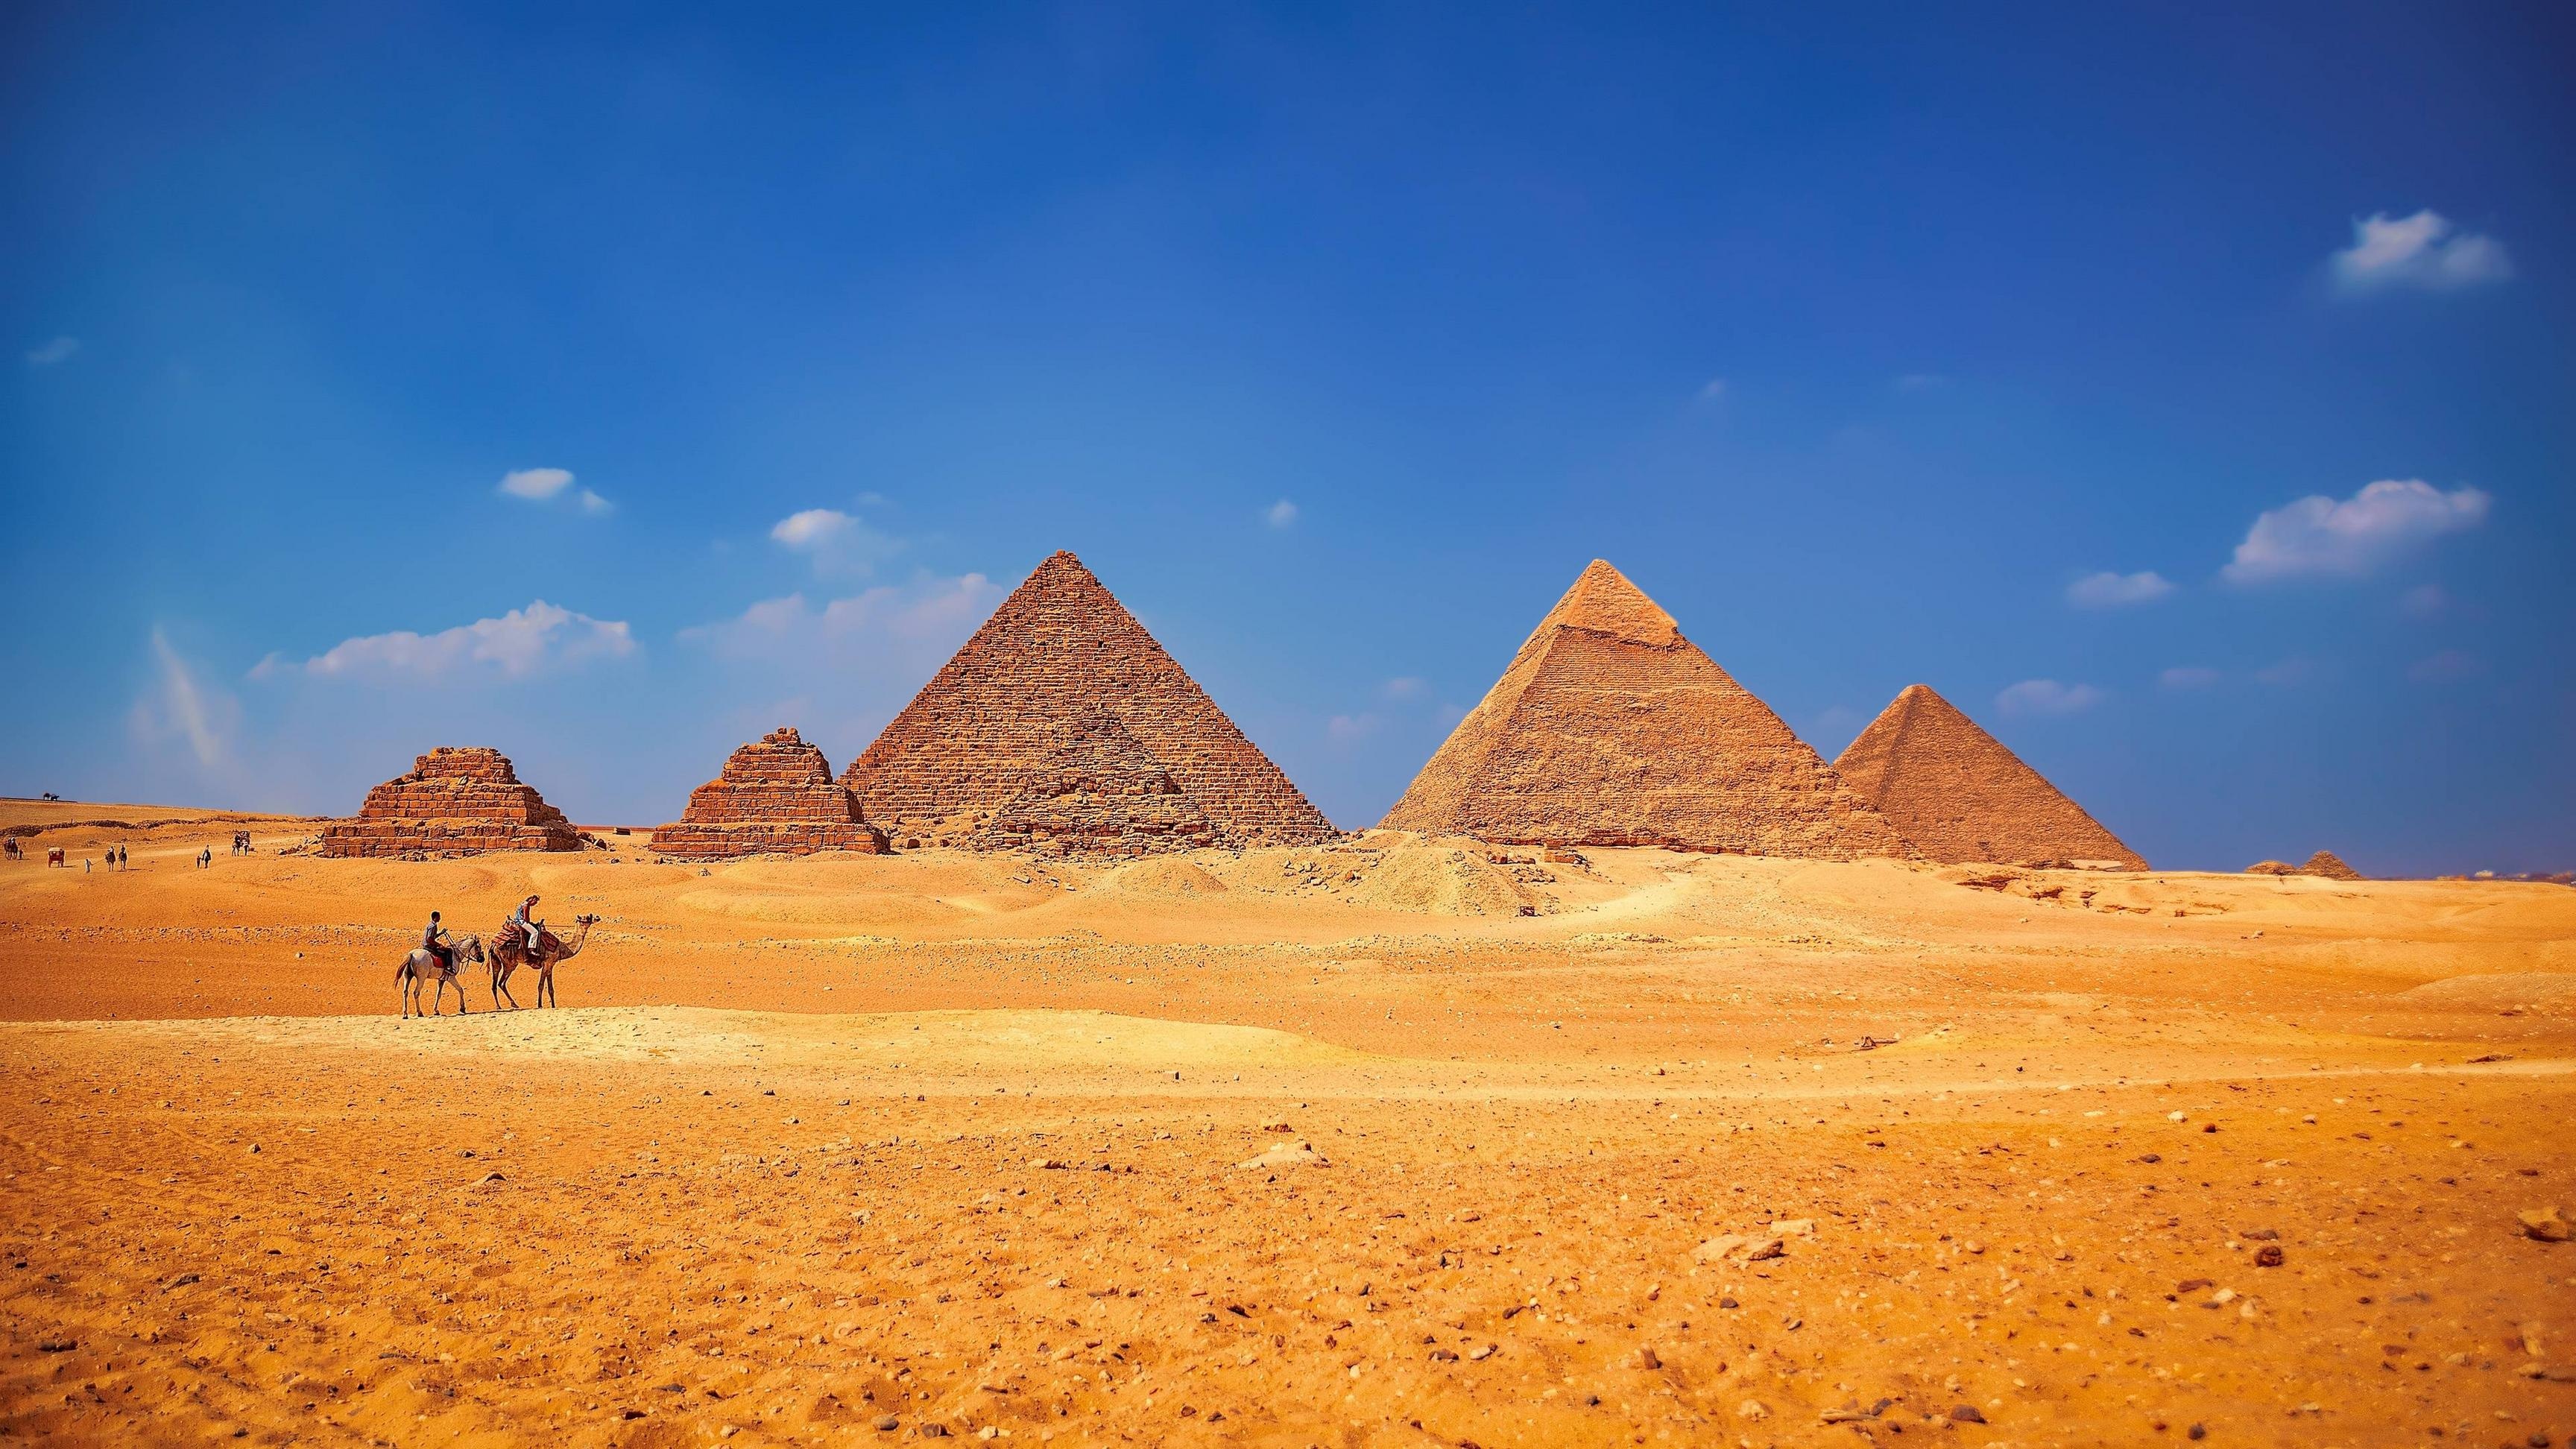 Pyramids of Giza, Egyptian wonders, Historical legacy, Architectural masterpieces, 3460x1950 HD Desktop